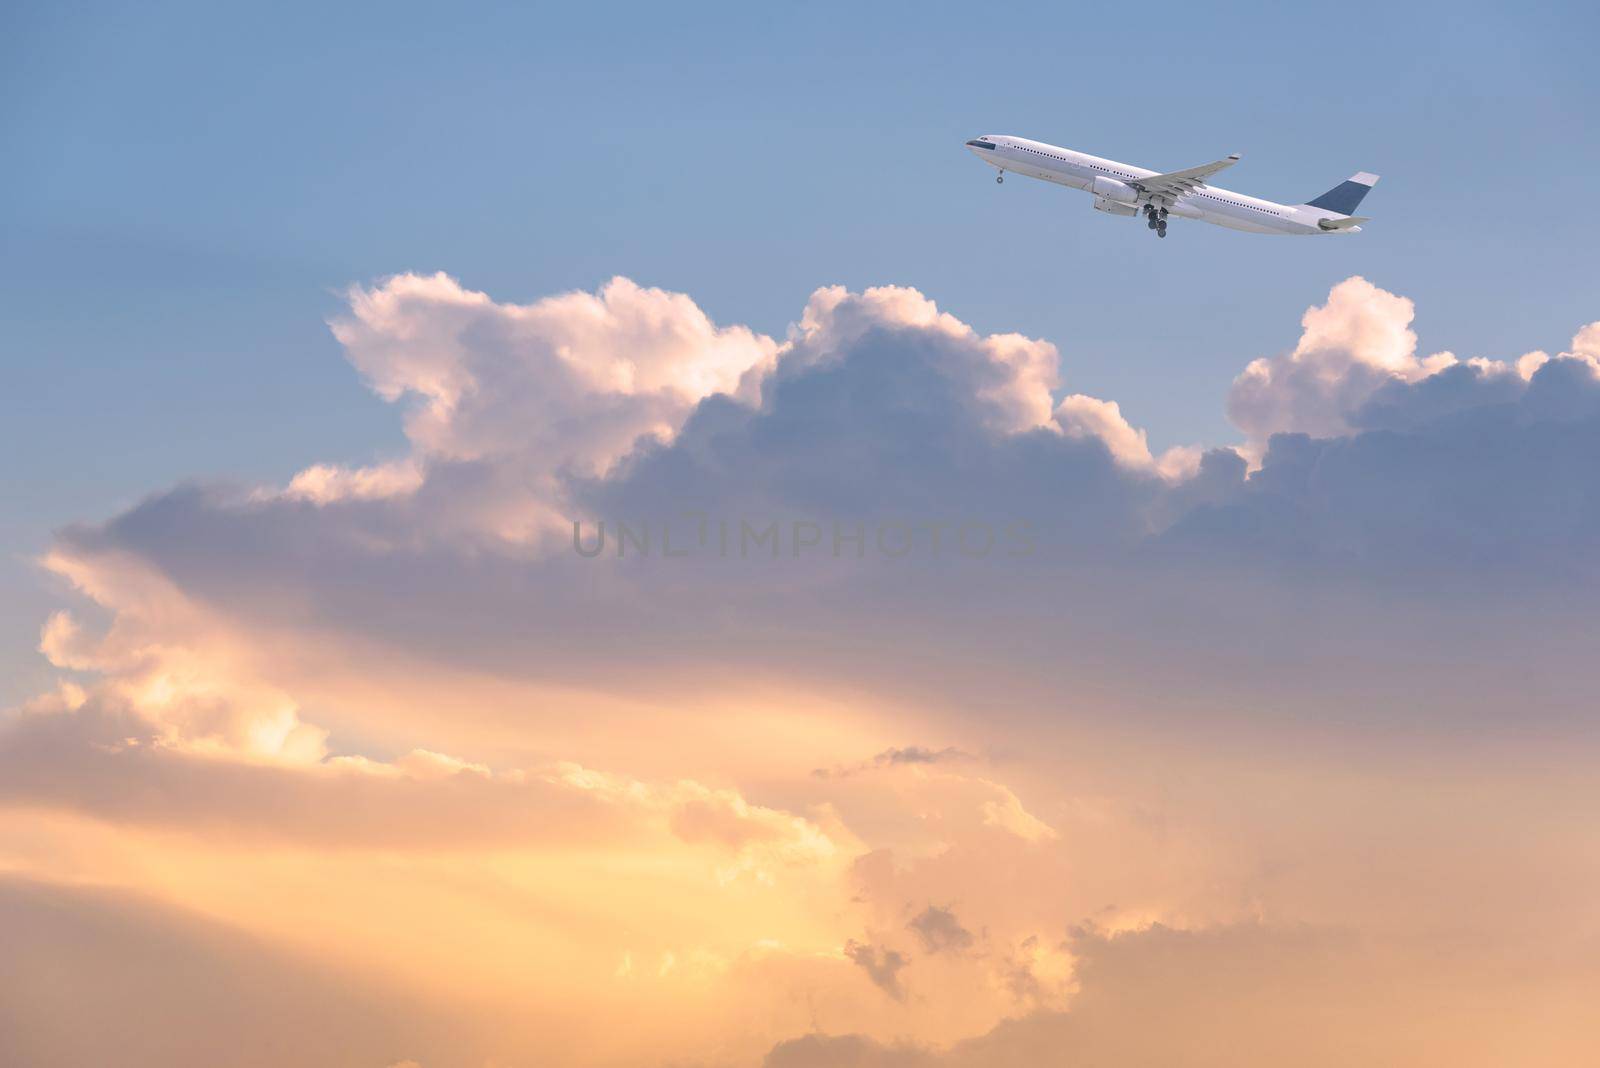 Commercial airplane flying over sunrise sky and clouds. Elegant Design with copy space for travel concept.
